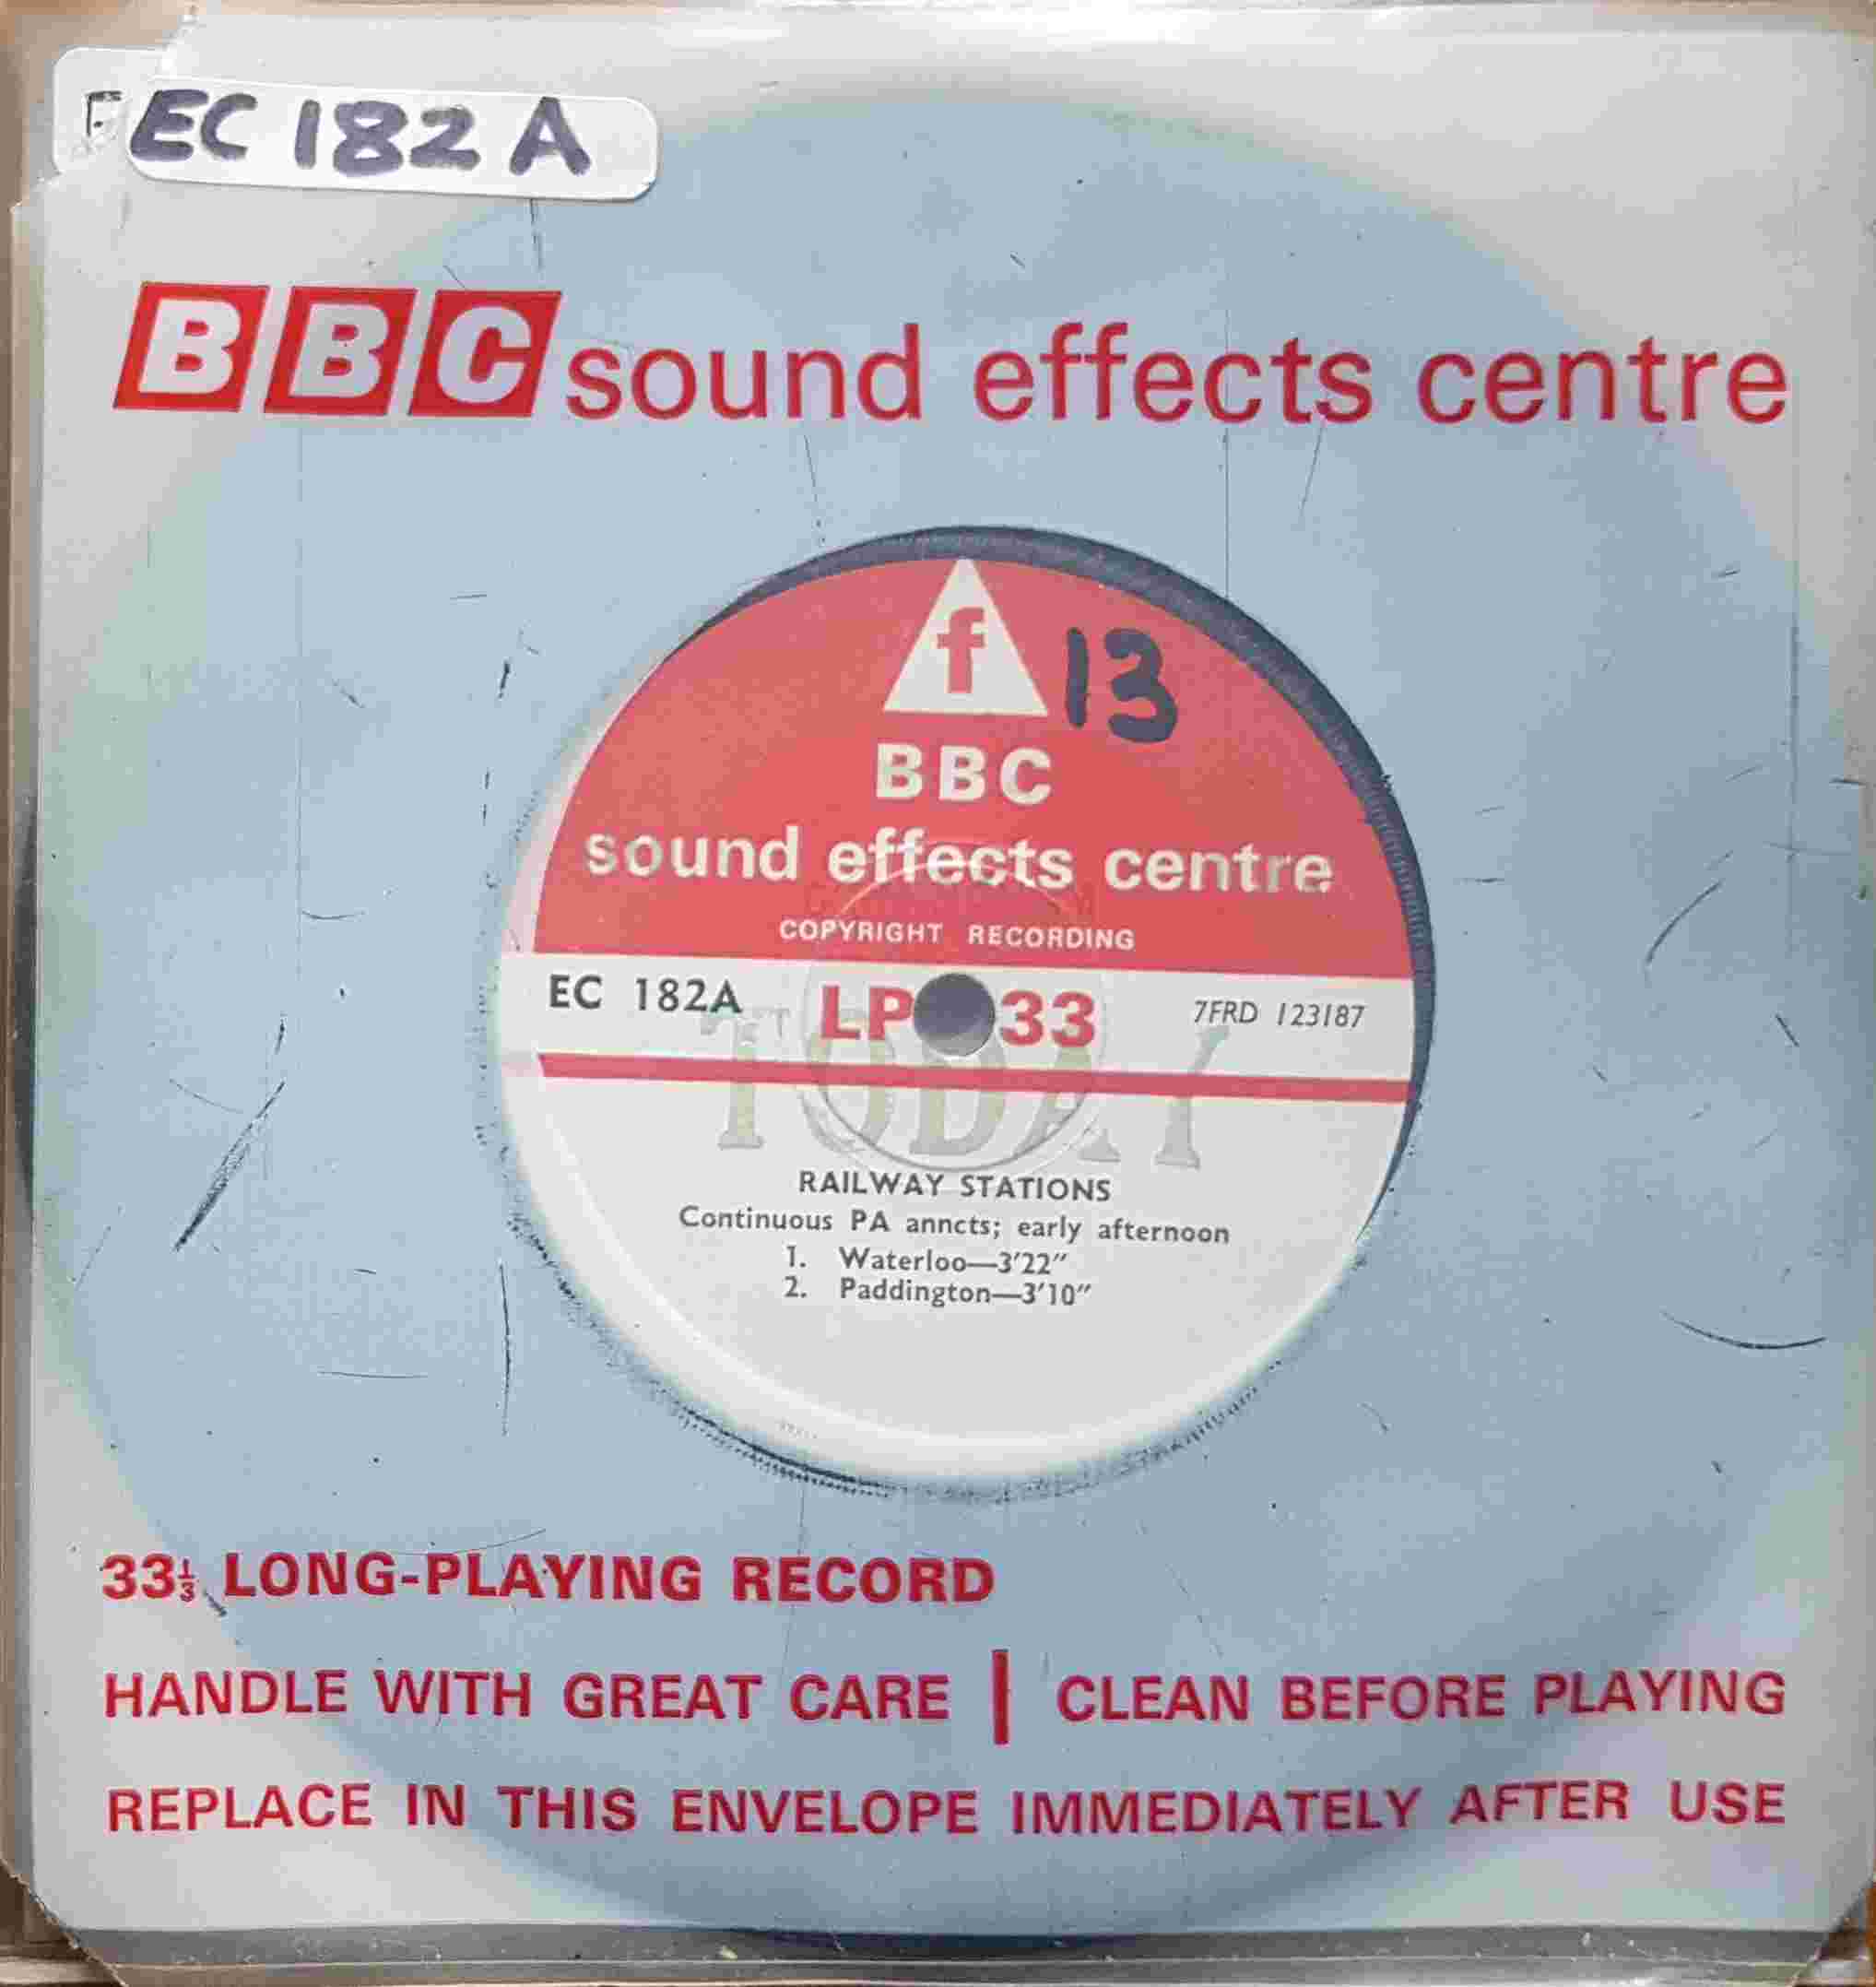 Picture of EC 182A Railway stations - Continuous PA anncts; early afternoon by artist Not registered from the BBC singles - Records and Tapes library